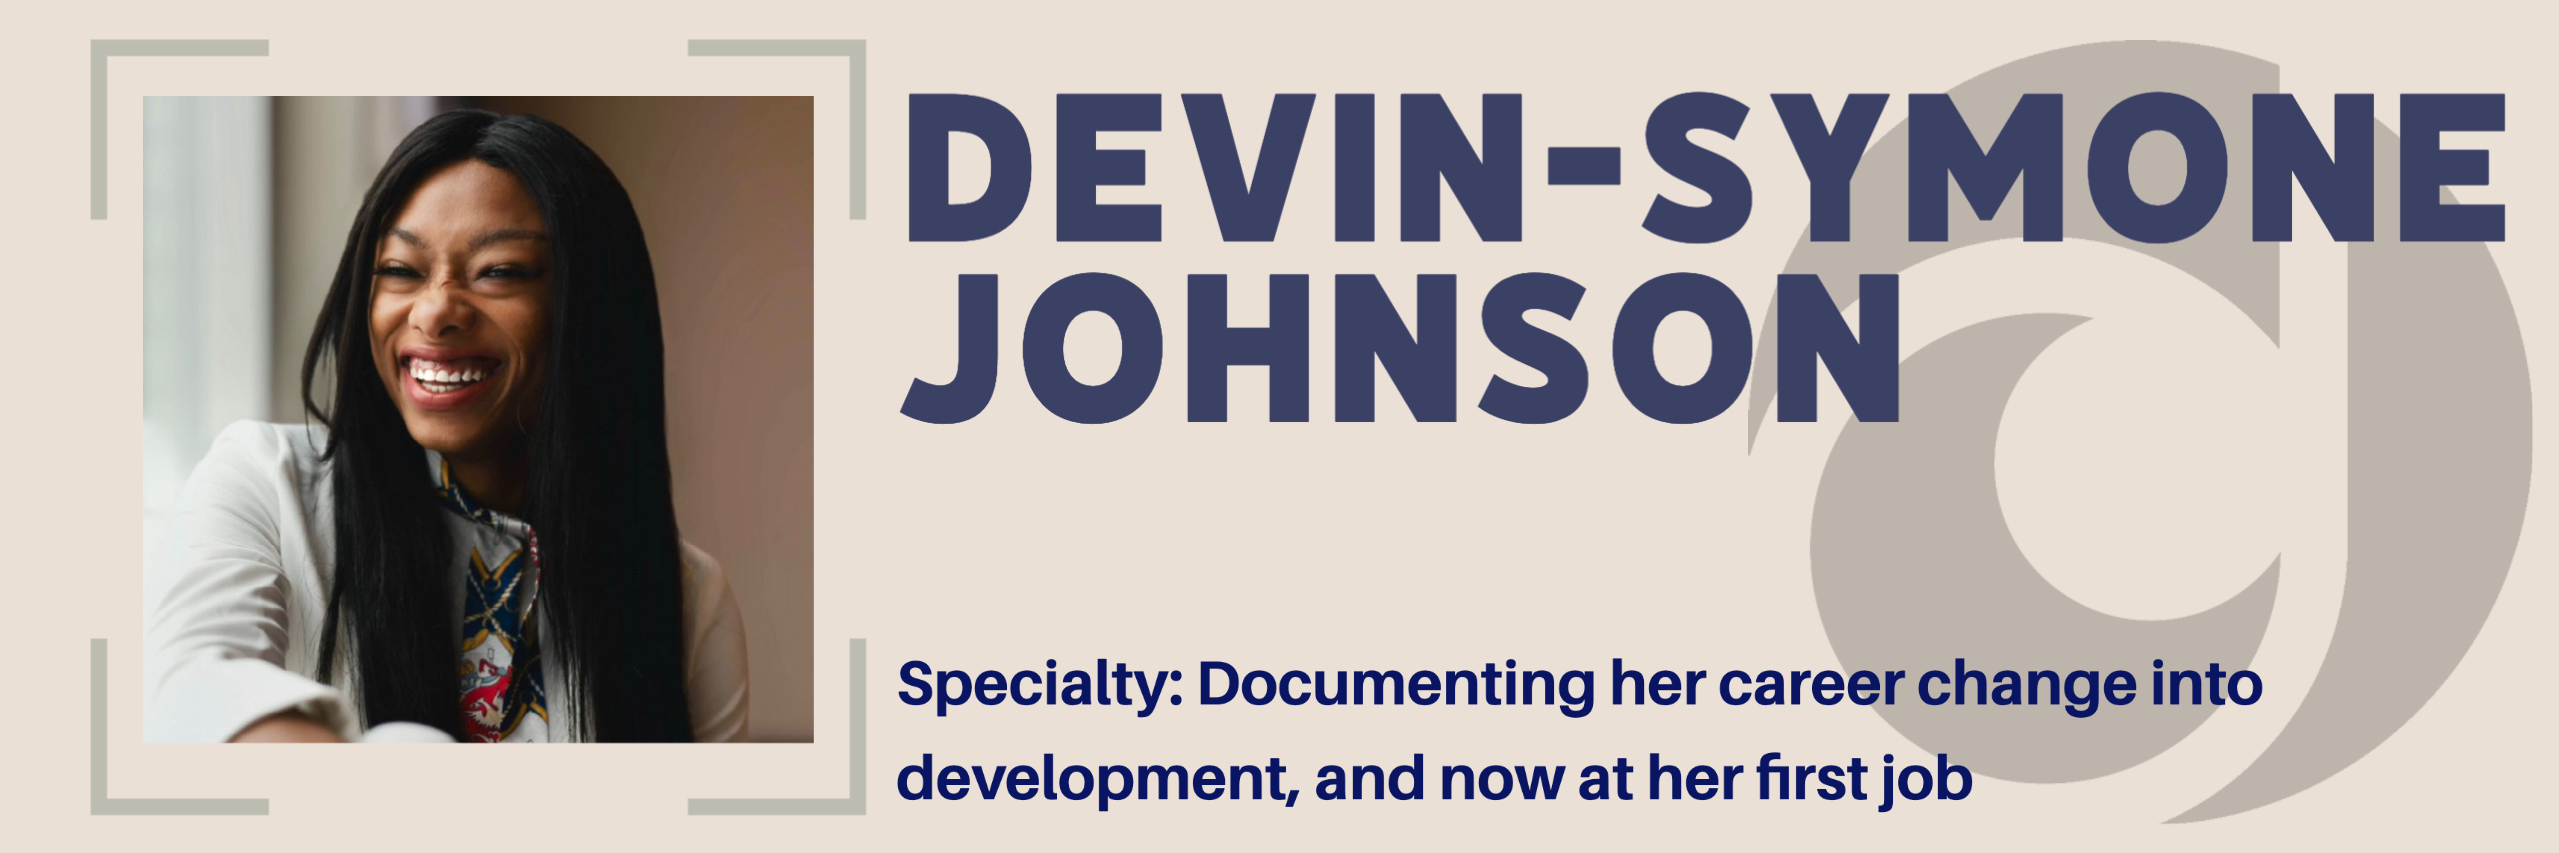 devCodeCamp graduate Devin-Symone Johnson shares her inspiration into a career change constantly on her Linkedin feed